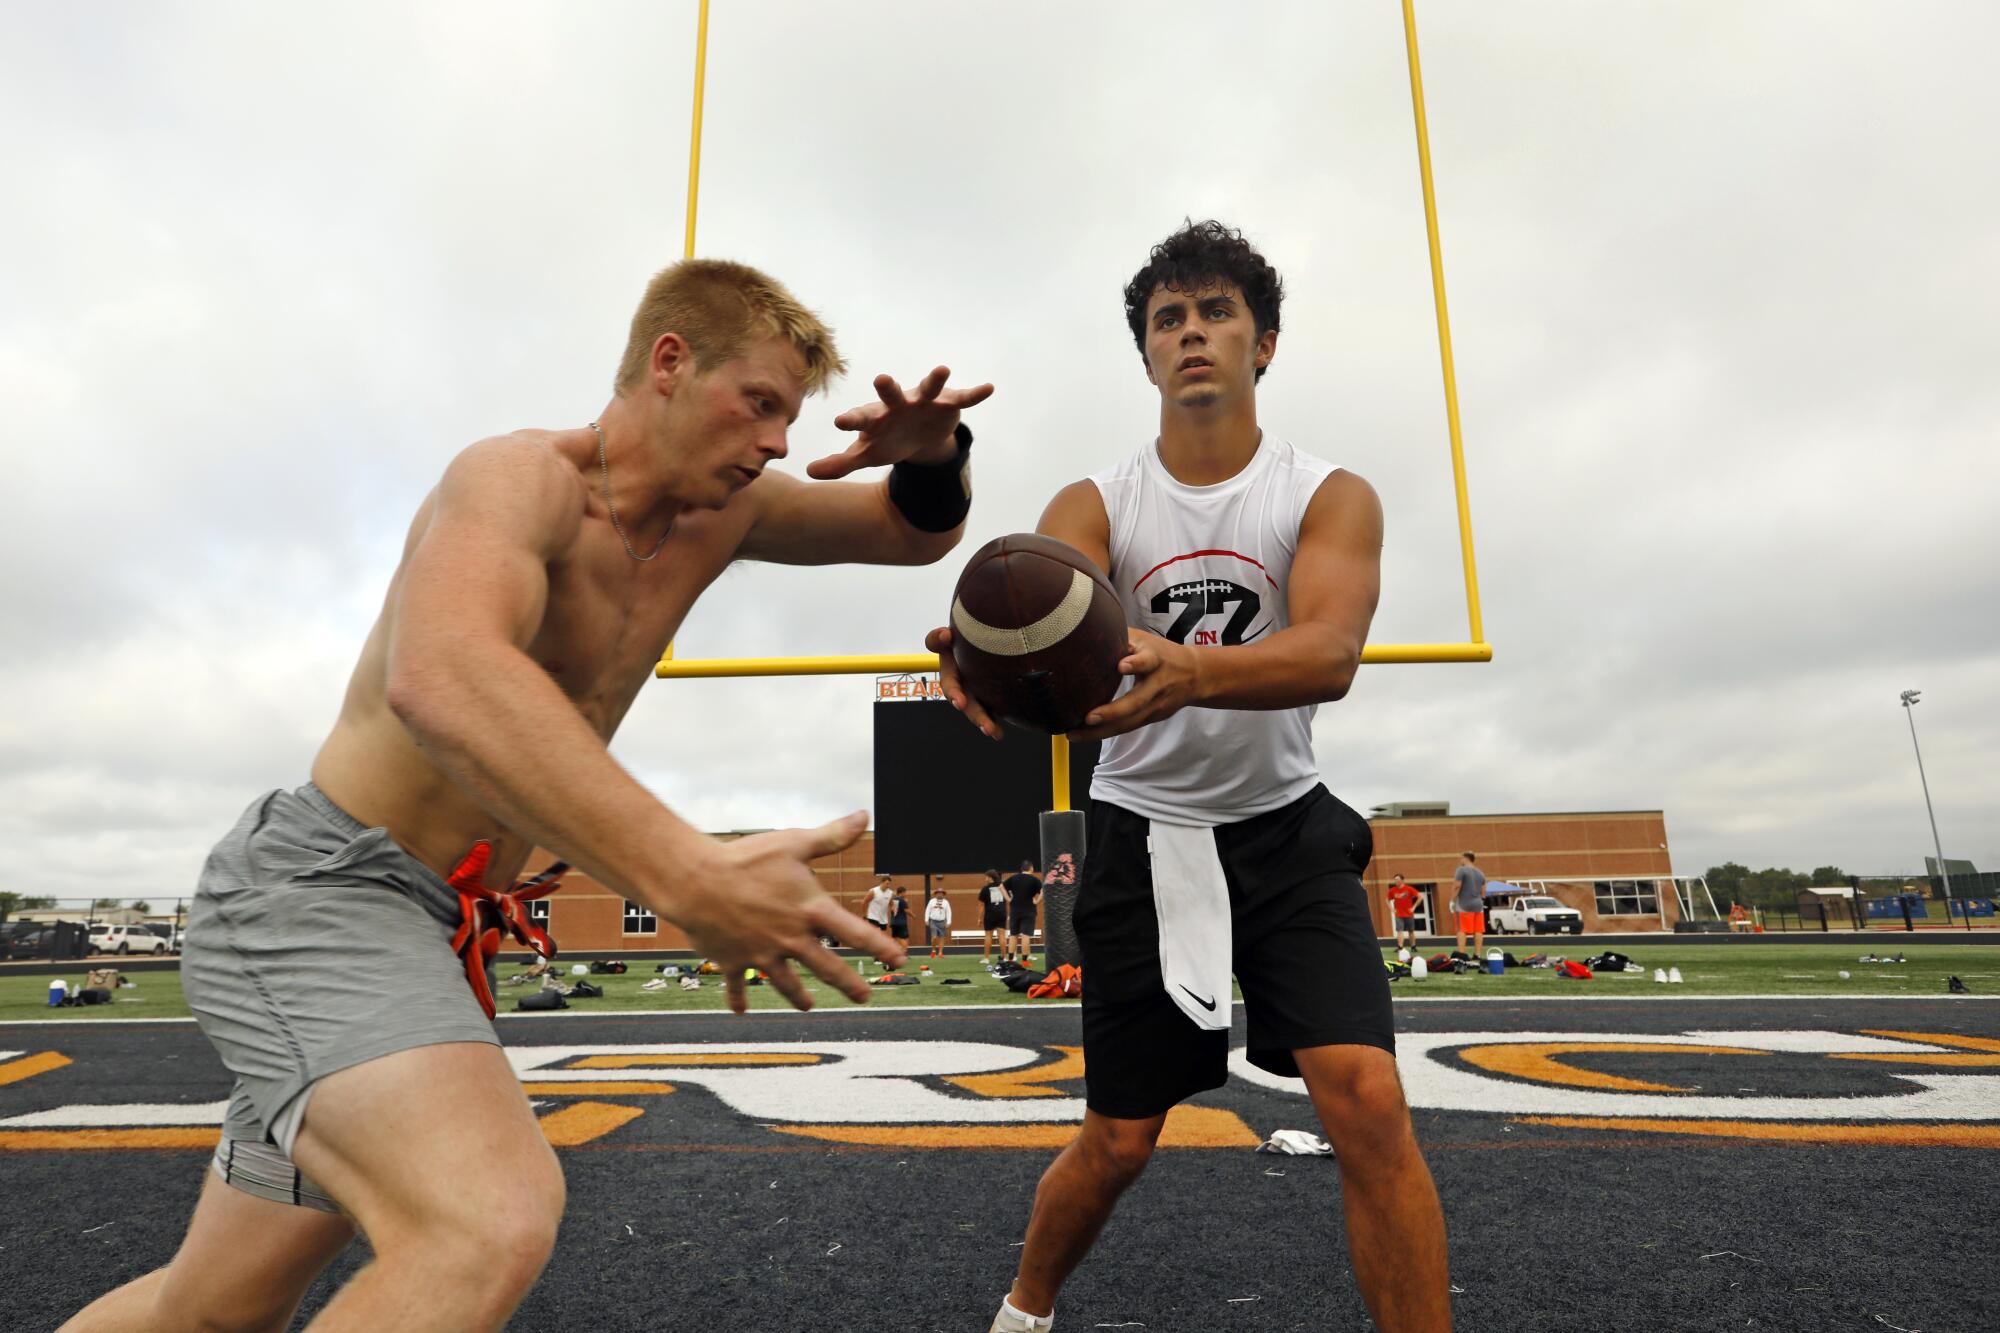 Ethan McBrayer, 17, right, hands off to Conner Smith, 16, left, during practice at Aledo High School.